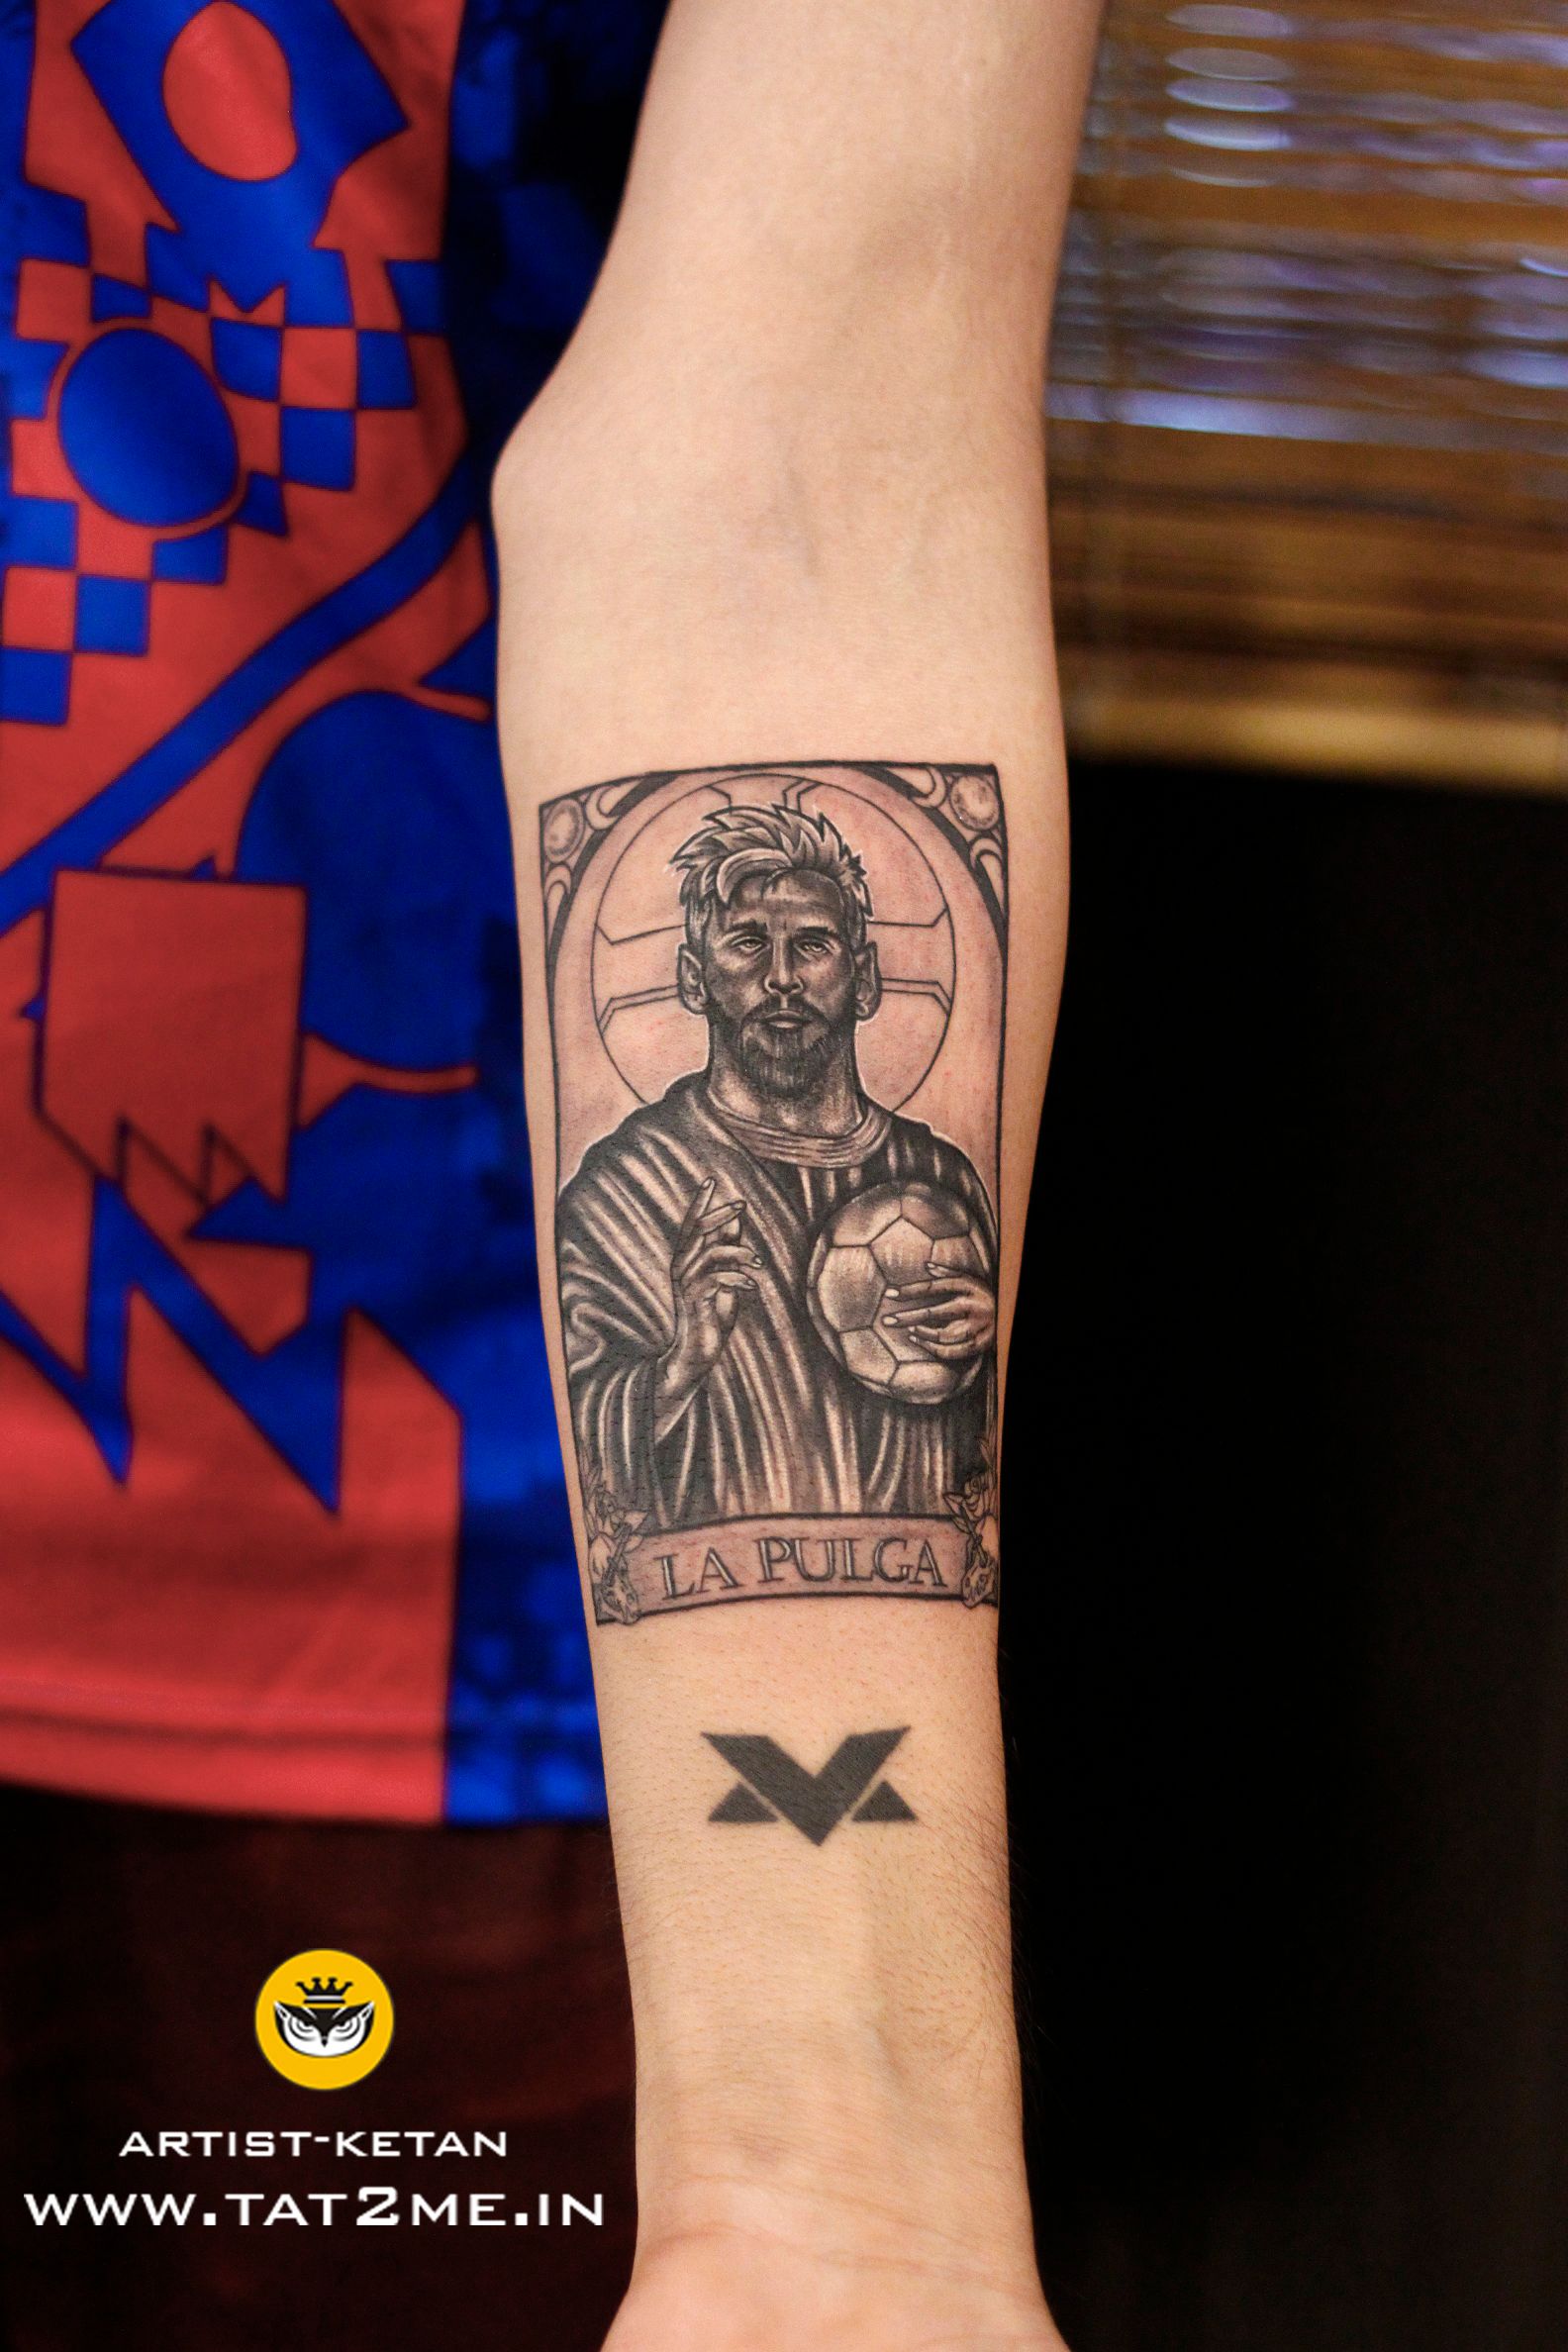 These Argentines Want A Messi Tattoo - Rediff.com